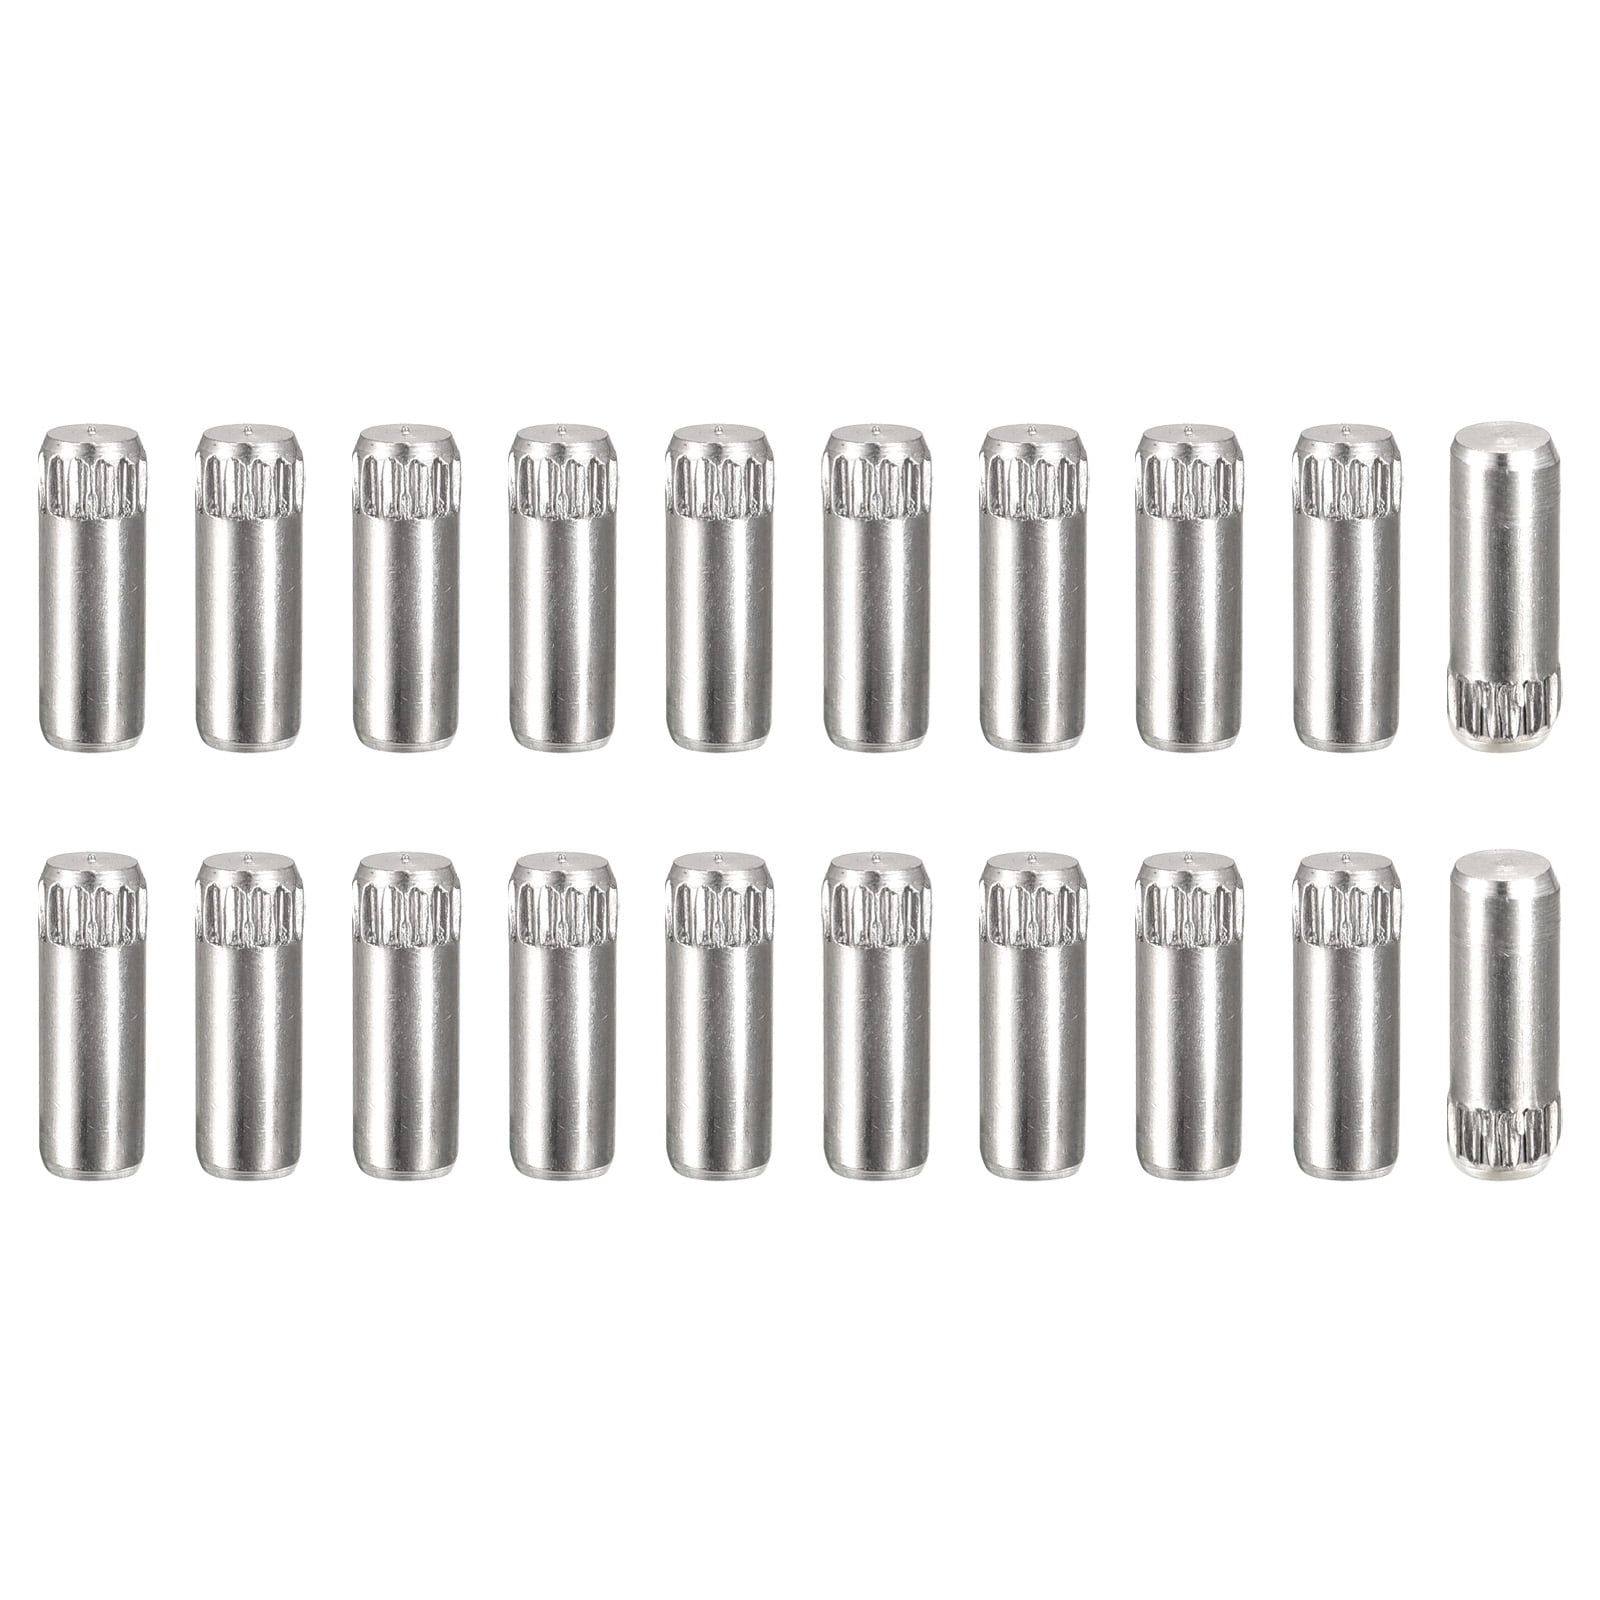 4x18mm 304 Stainless Steel Dowel Pins, 20 Pack Knurled Head Flat End Dowel  Pin